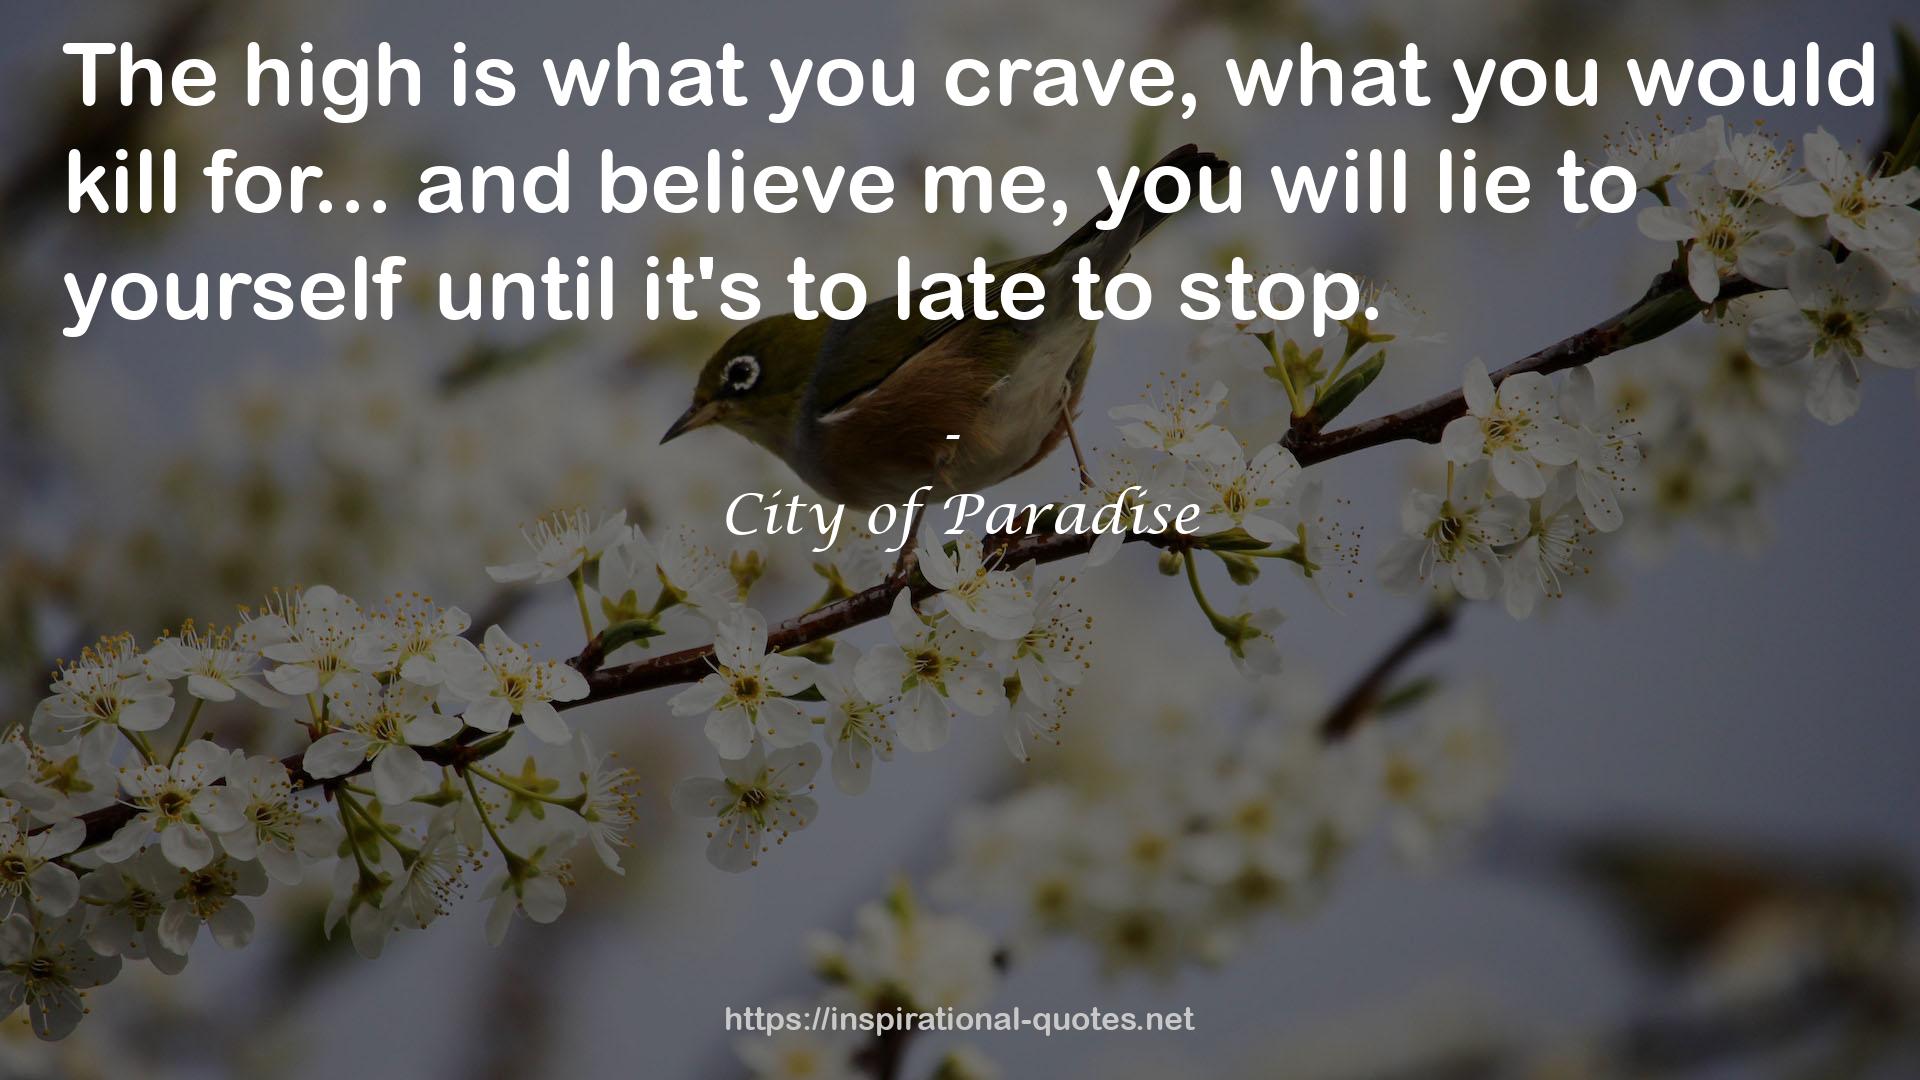 City of Paradise QUOTES